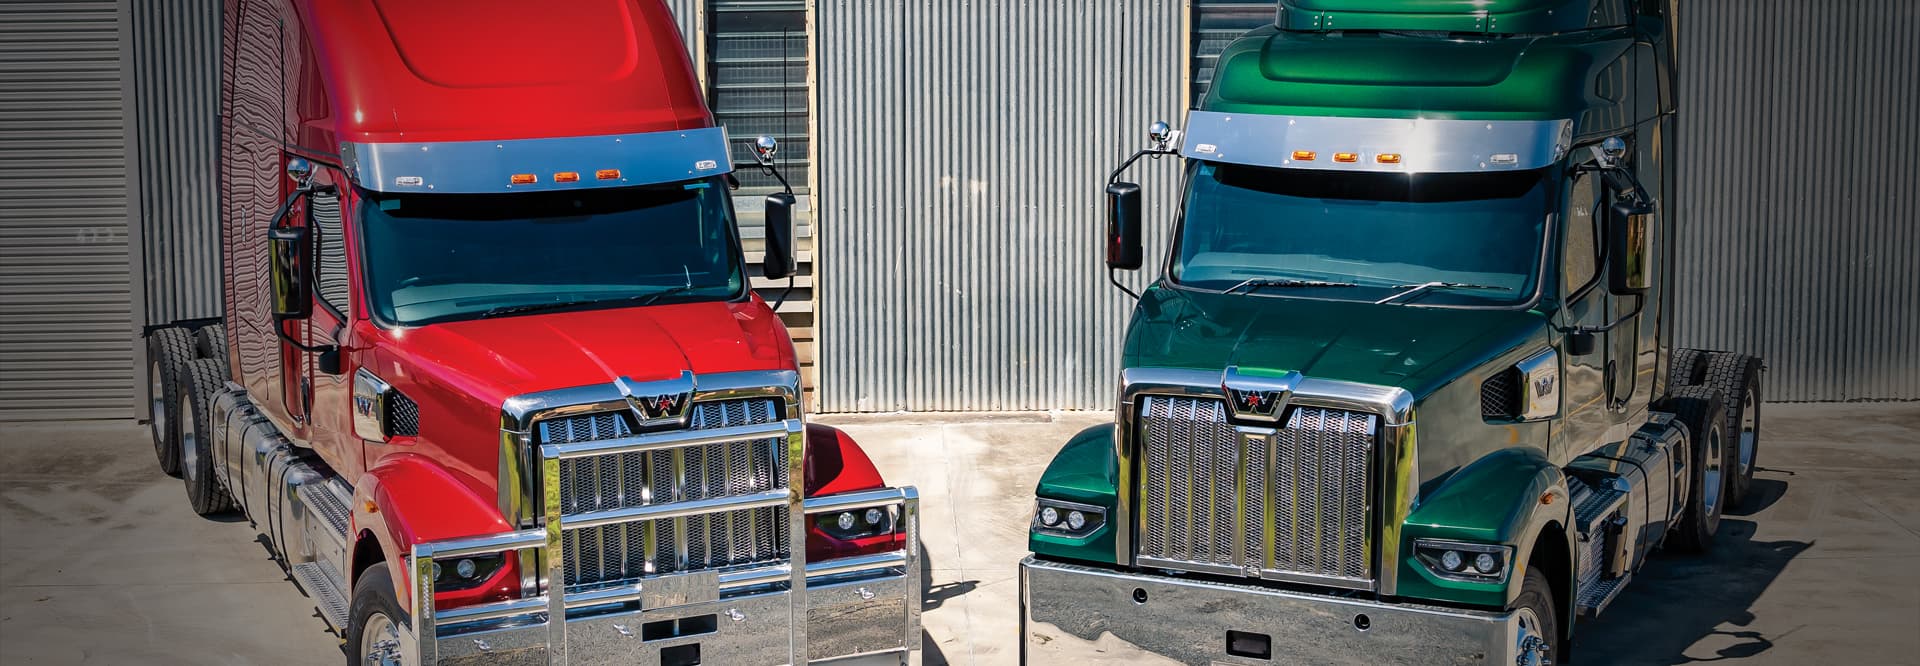 red and green trucks together